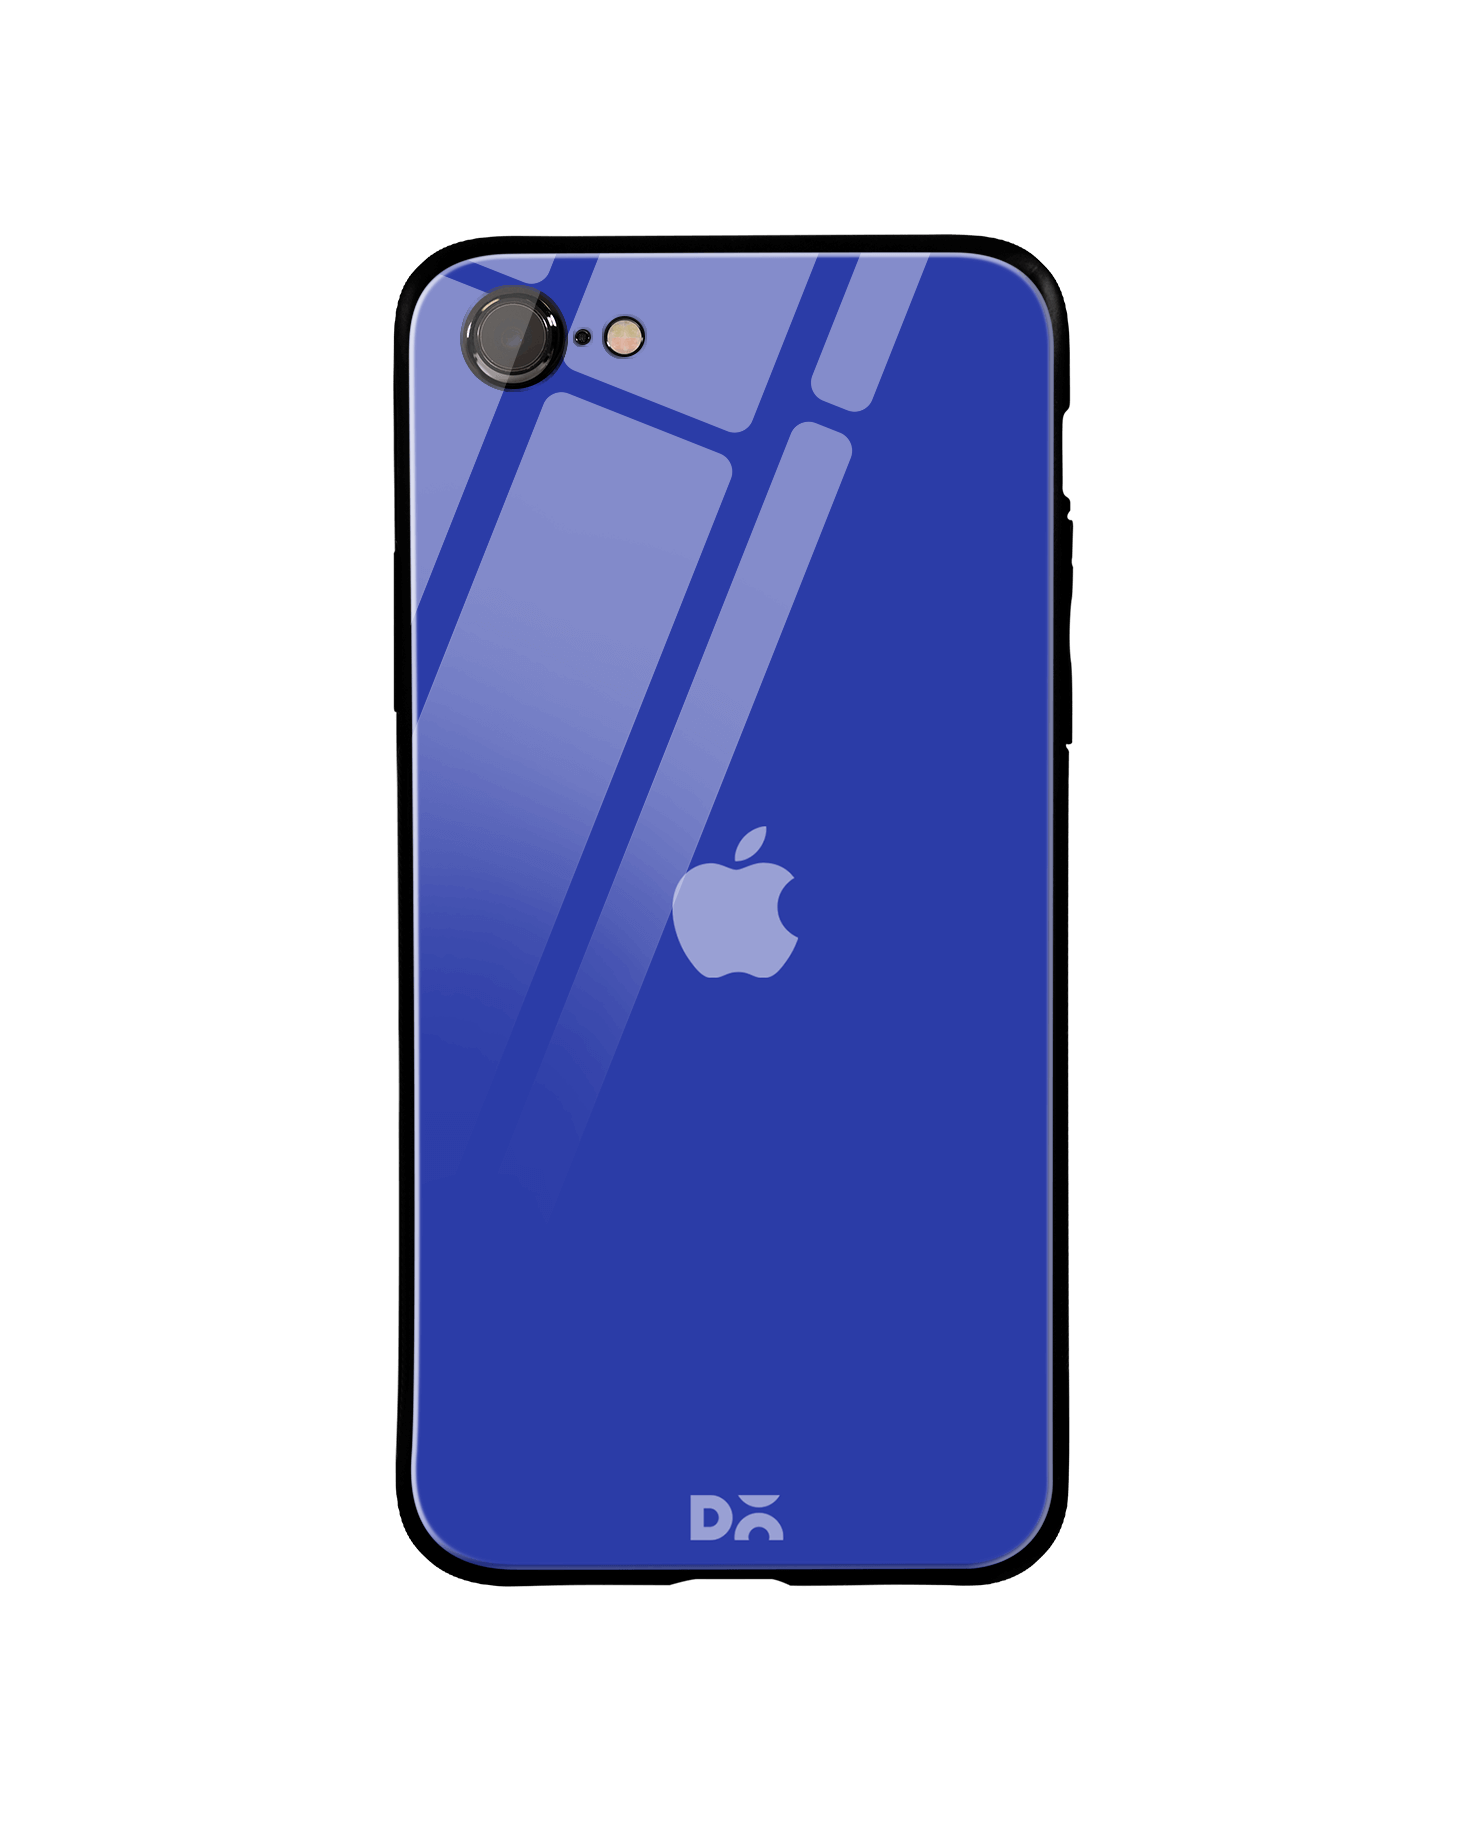 Dailyobjects Royal Blue Glass Case Cover For Iphone Se Buy At Dailyobjects